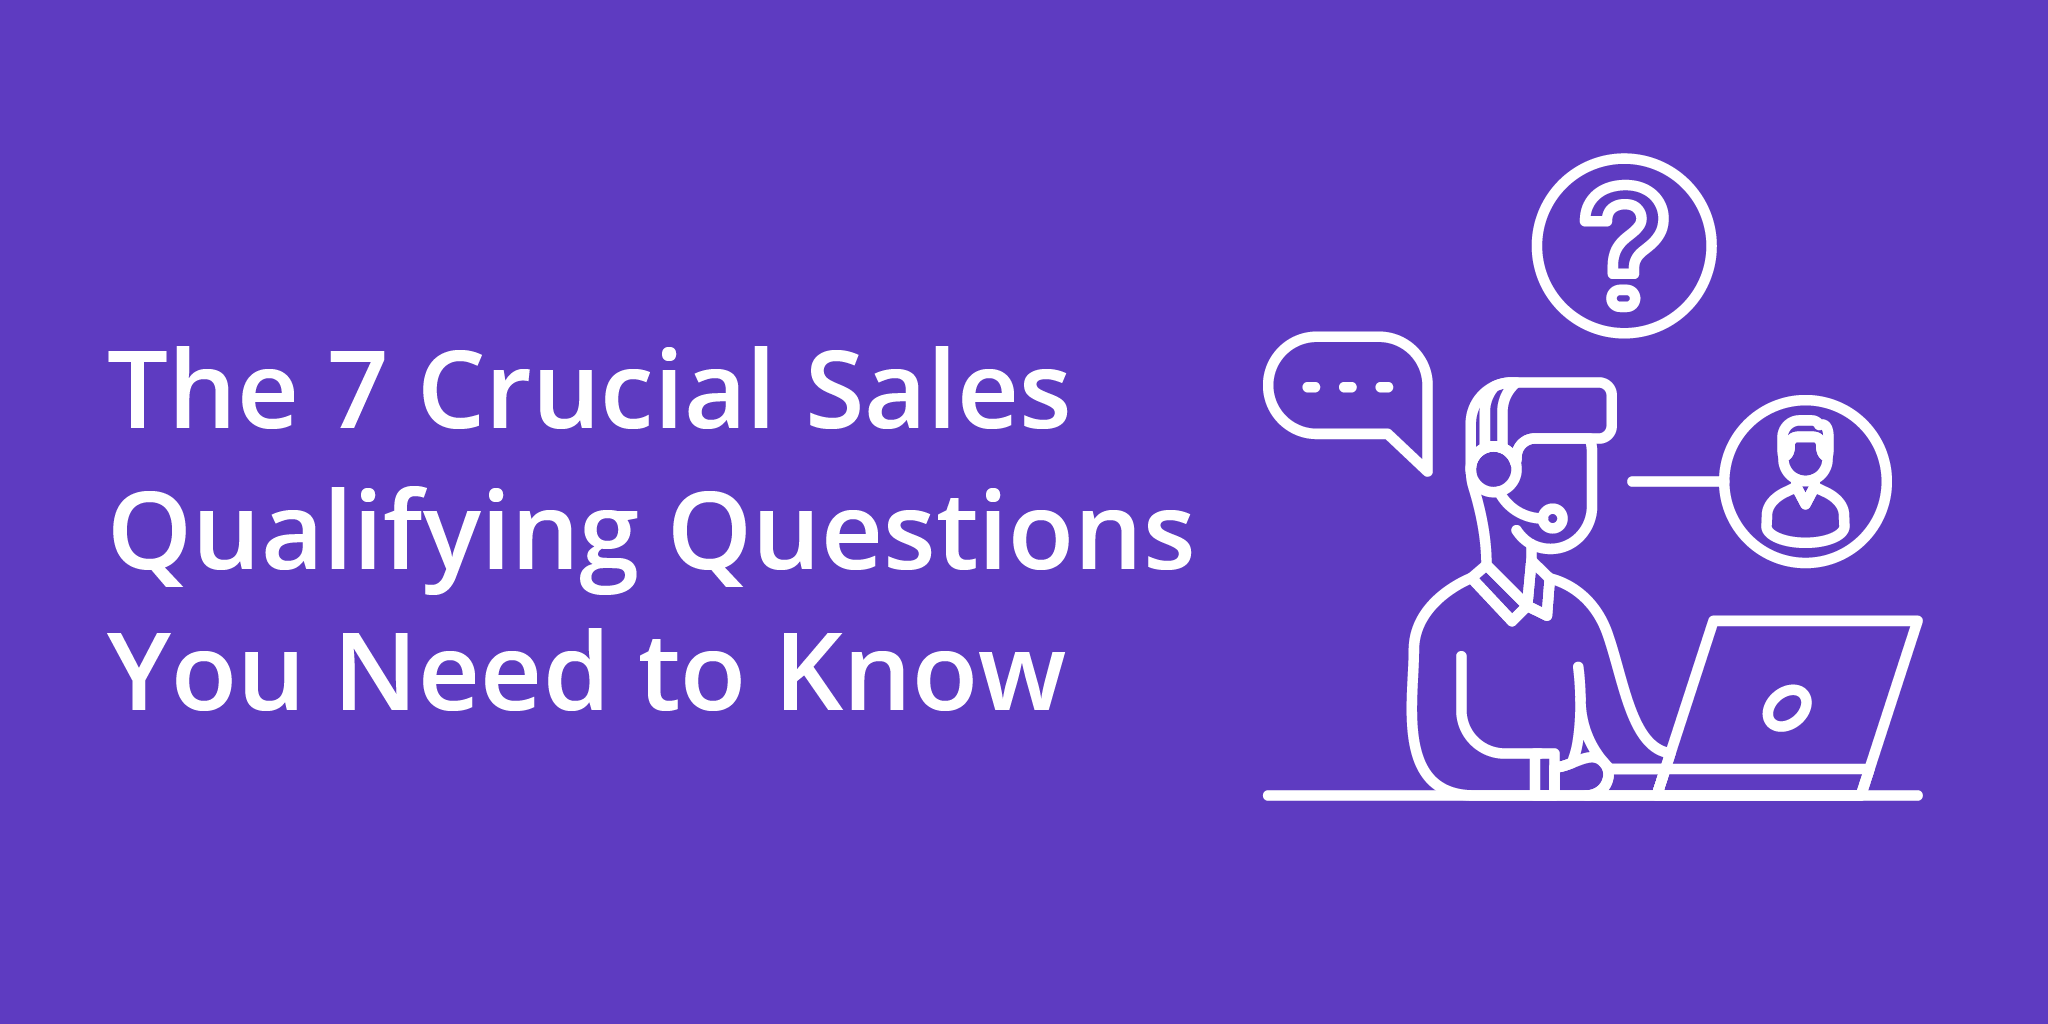 The 7 Crucial Sales Qualifying Questions You Need to Know | Telephones for business